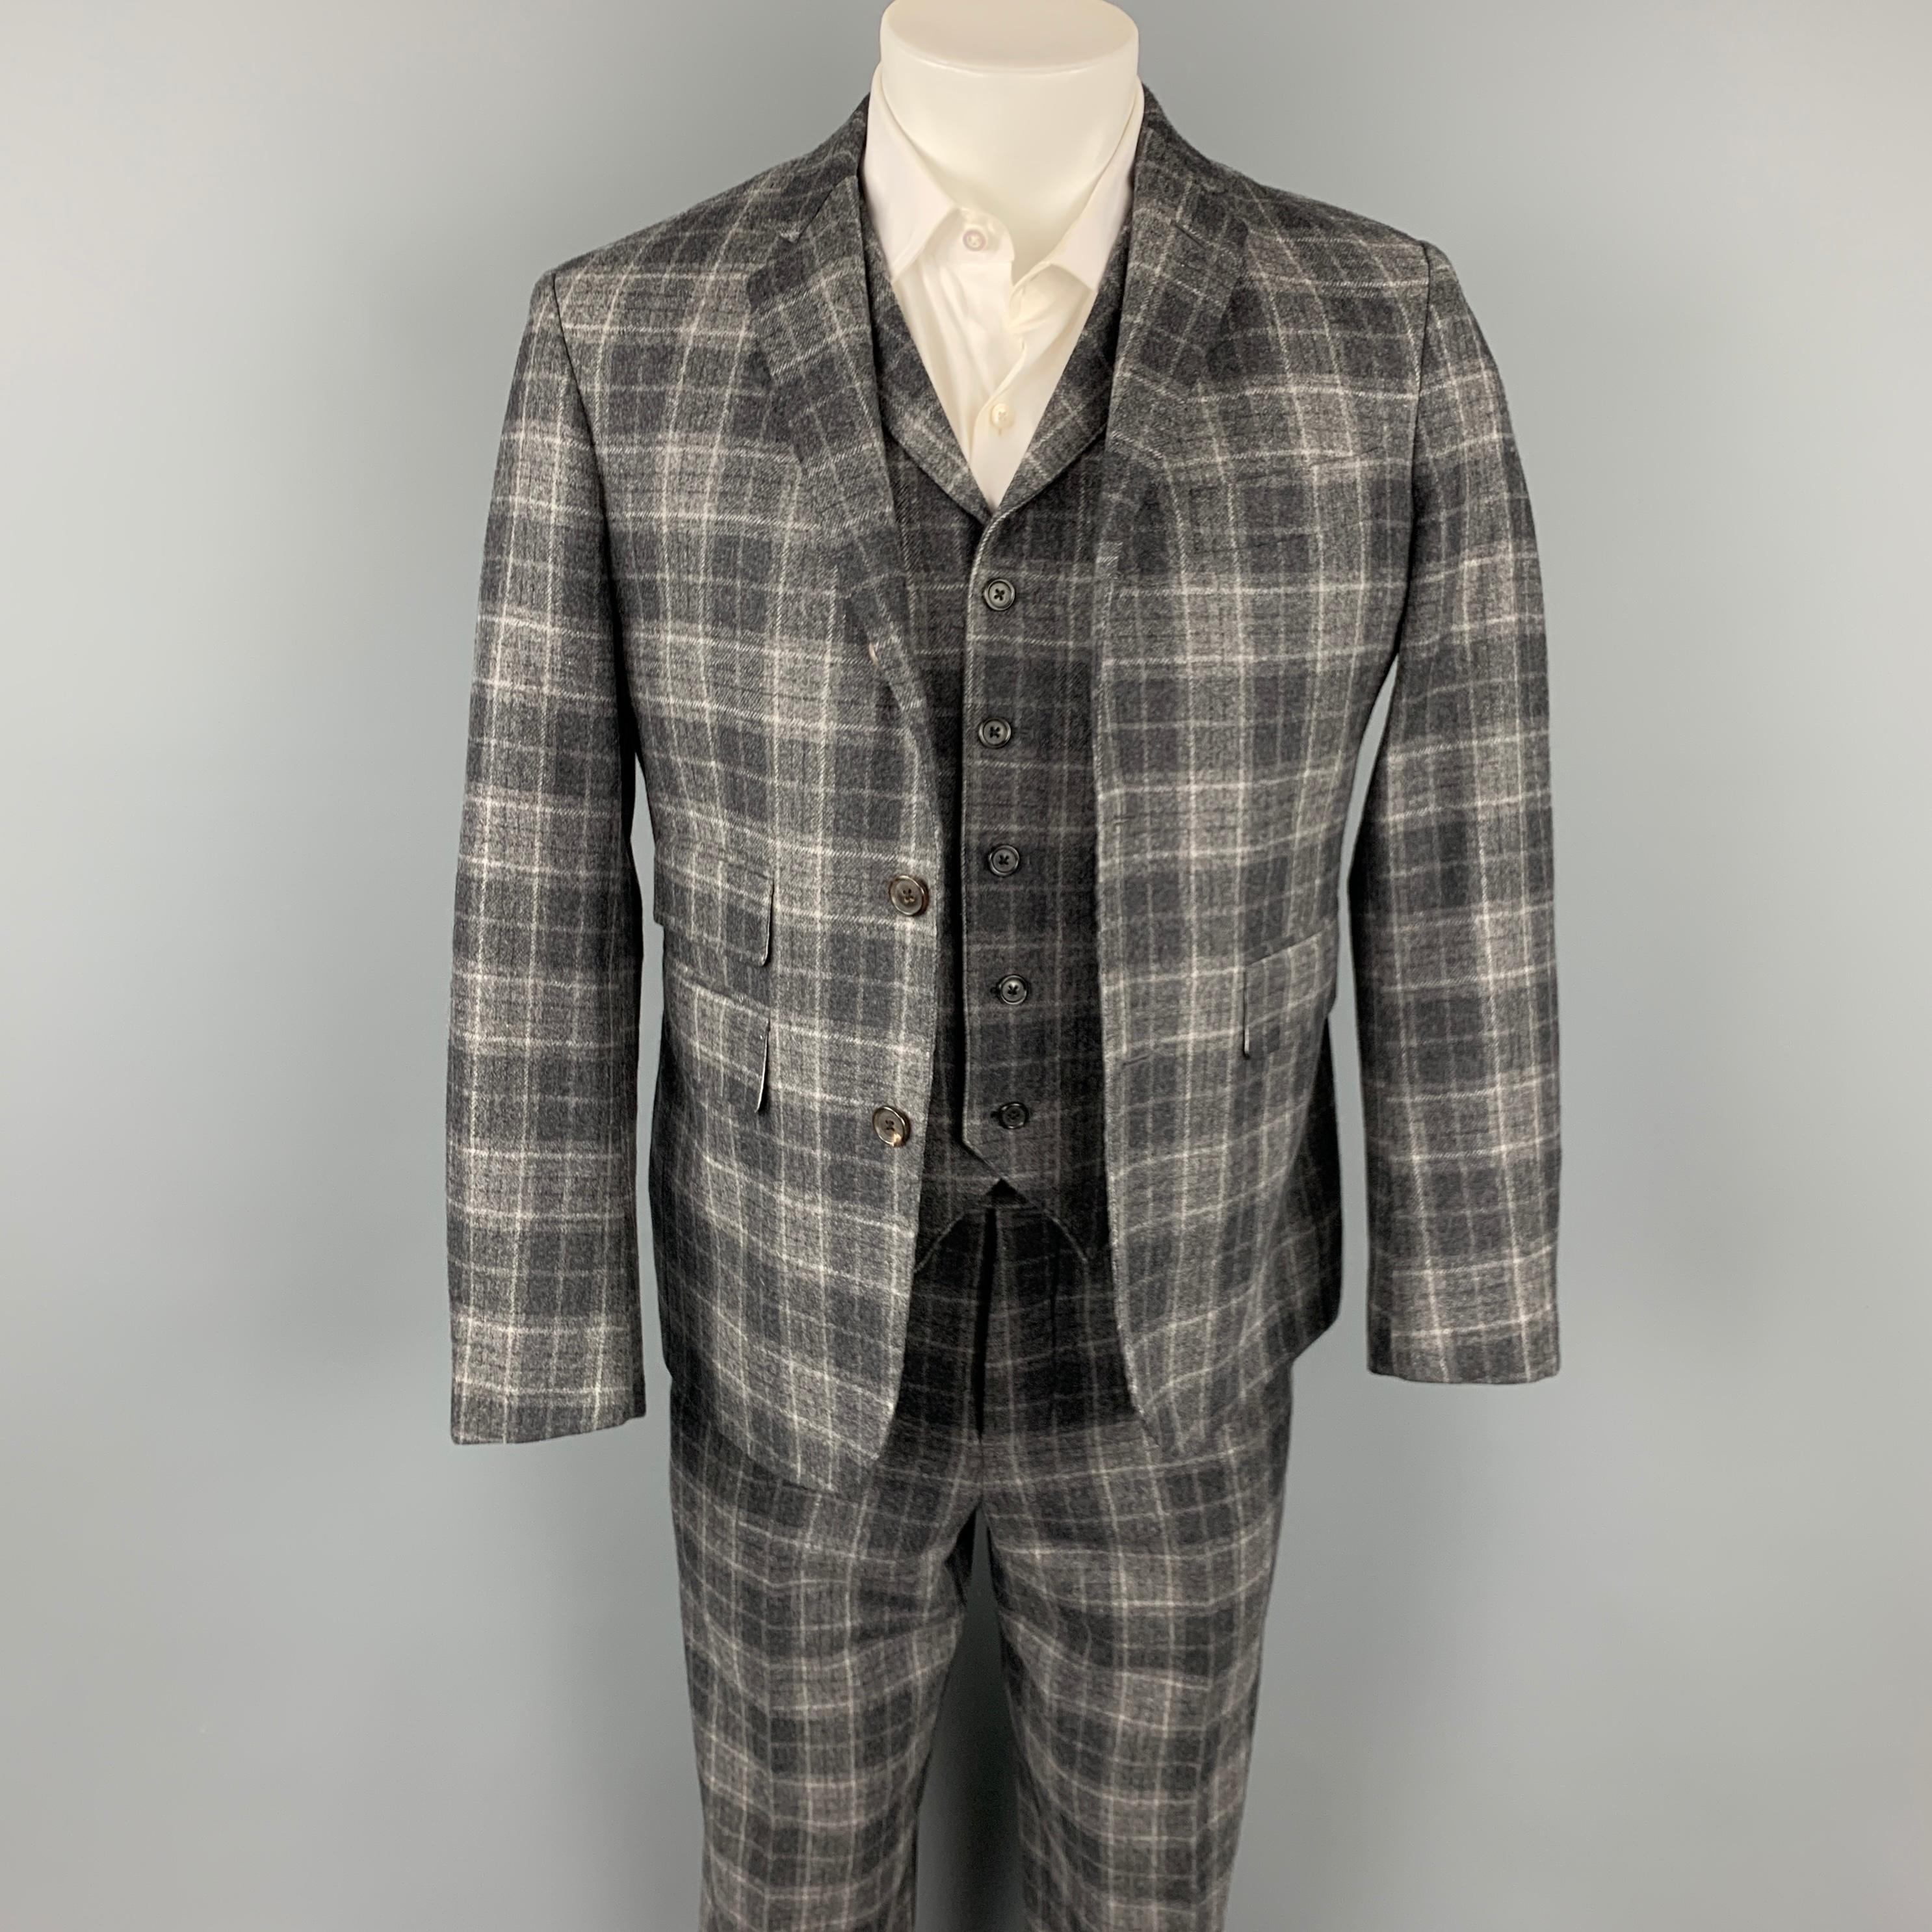 BLACK FLEECE 3 Piece suit comes in a dark gray plaid wool / cashmere with a full liner and includes a single breasted, three button sport coat with a notch lapel. Includes, matching flat front trousers and vest. Made in USA.

Very Good Pre-Owned